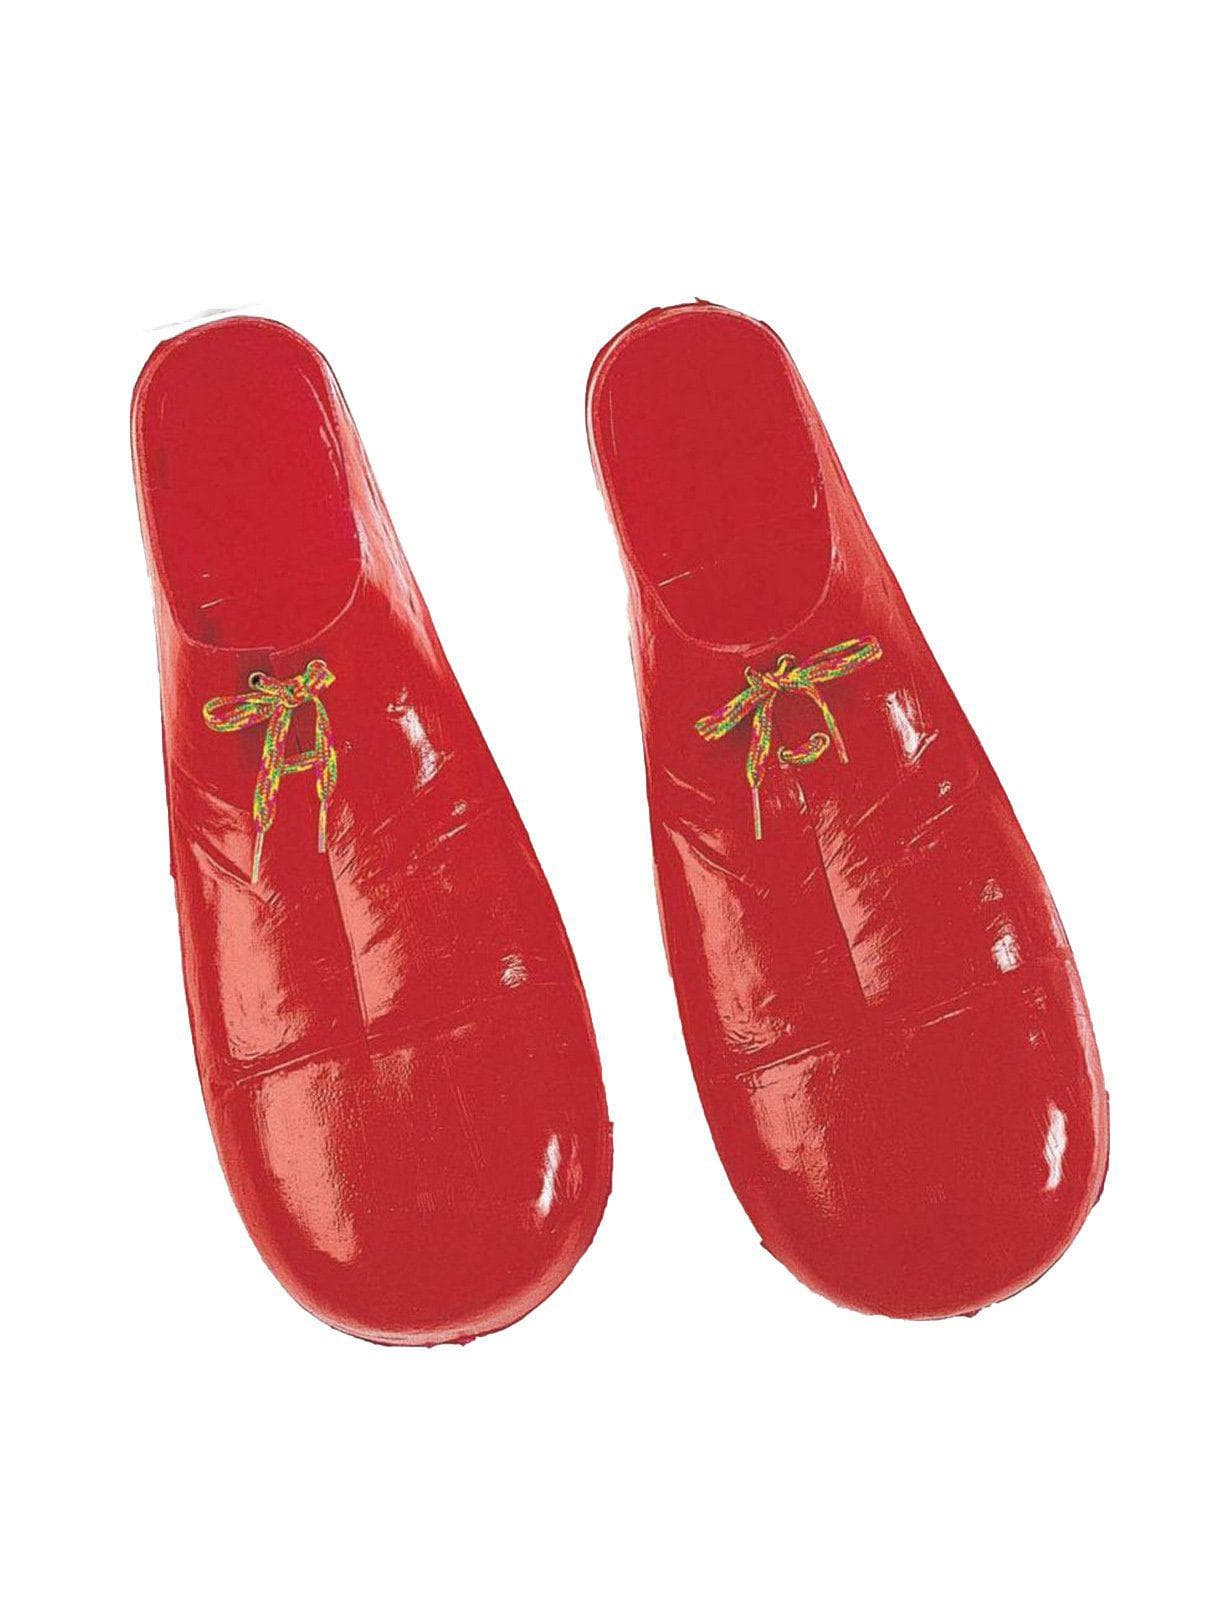 Red Child Clown Shoes - costumes.com